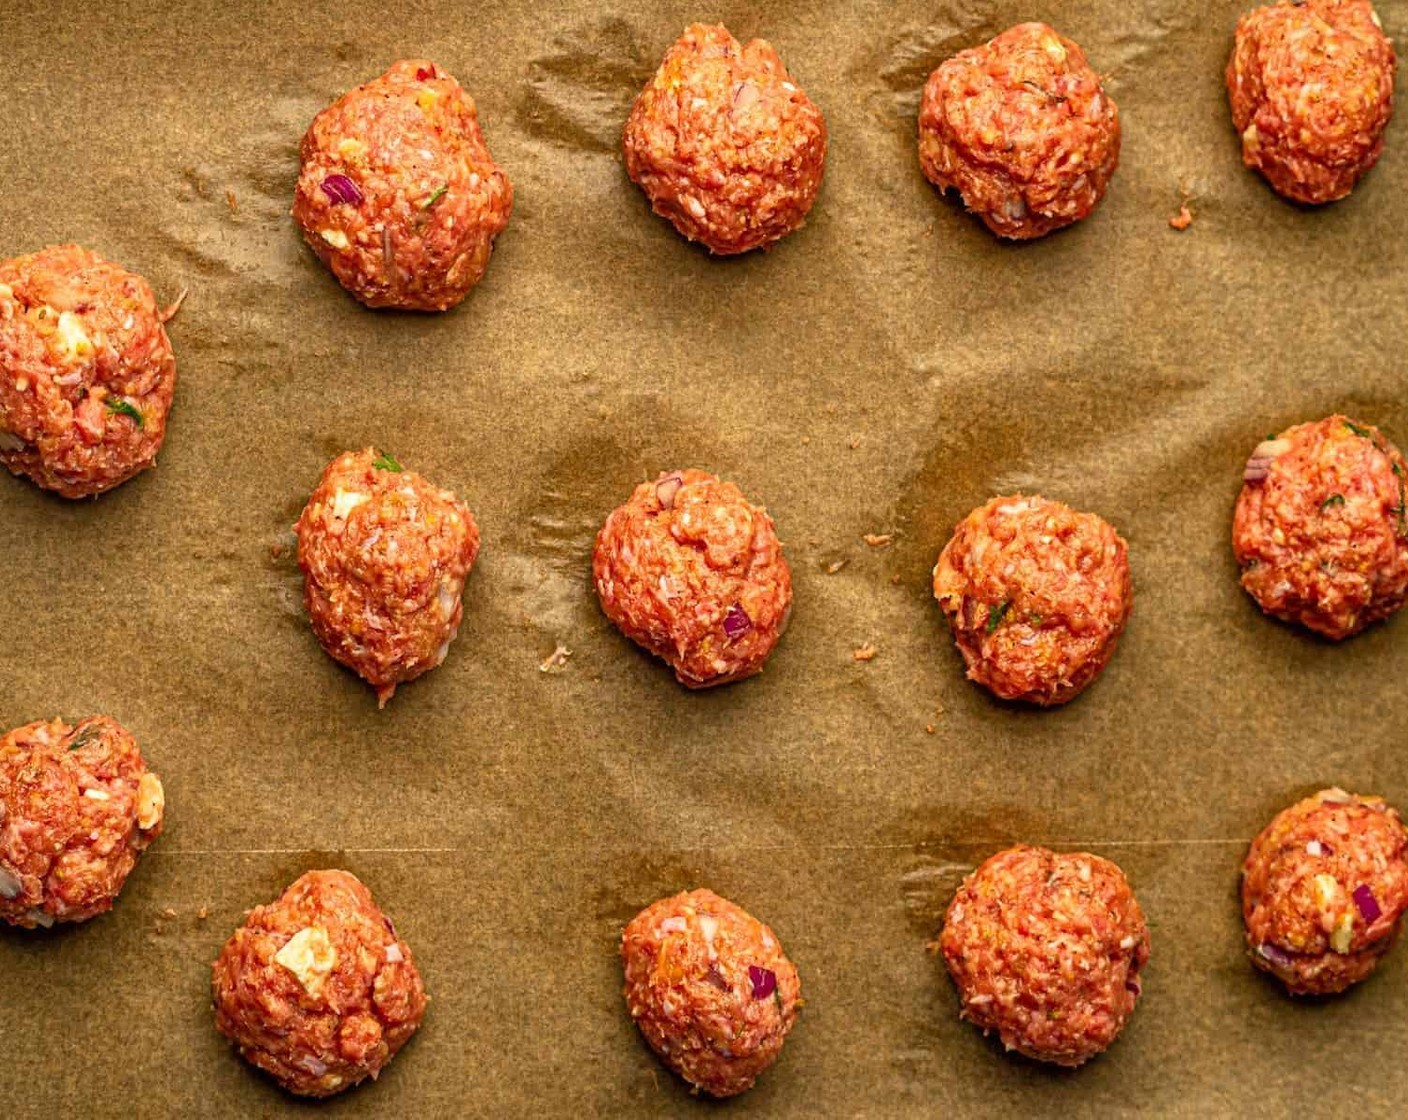 step 3 Use a cookie or ice cream scoop to form the meatballs and then roll them in between the palm of your hands. Place the meatballs on the parchment paper-lined baking sheet.